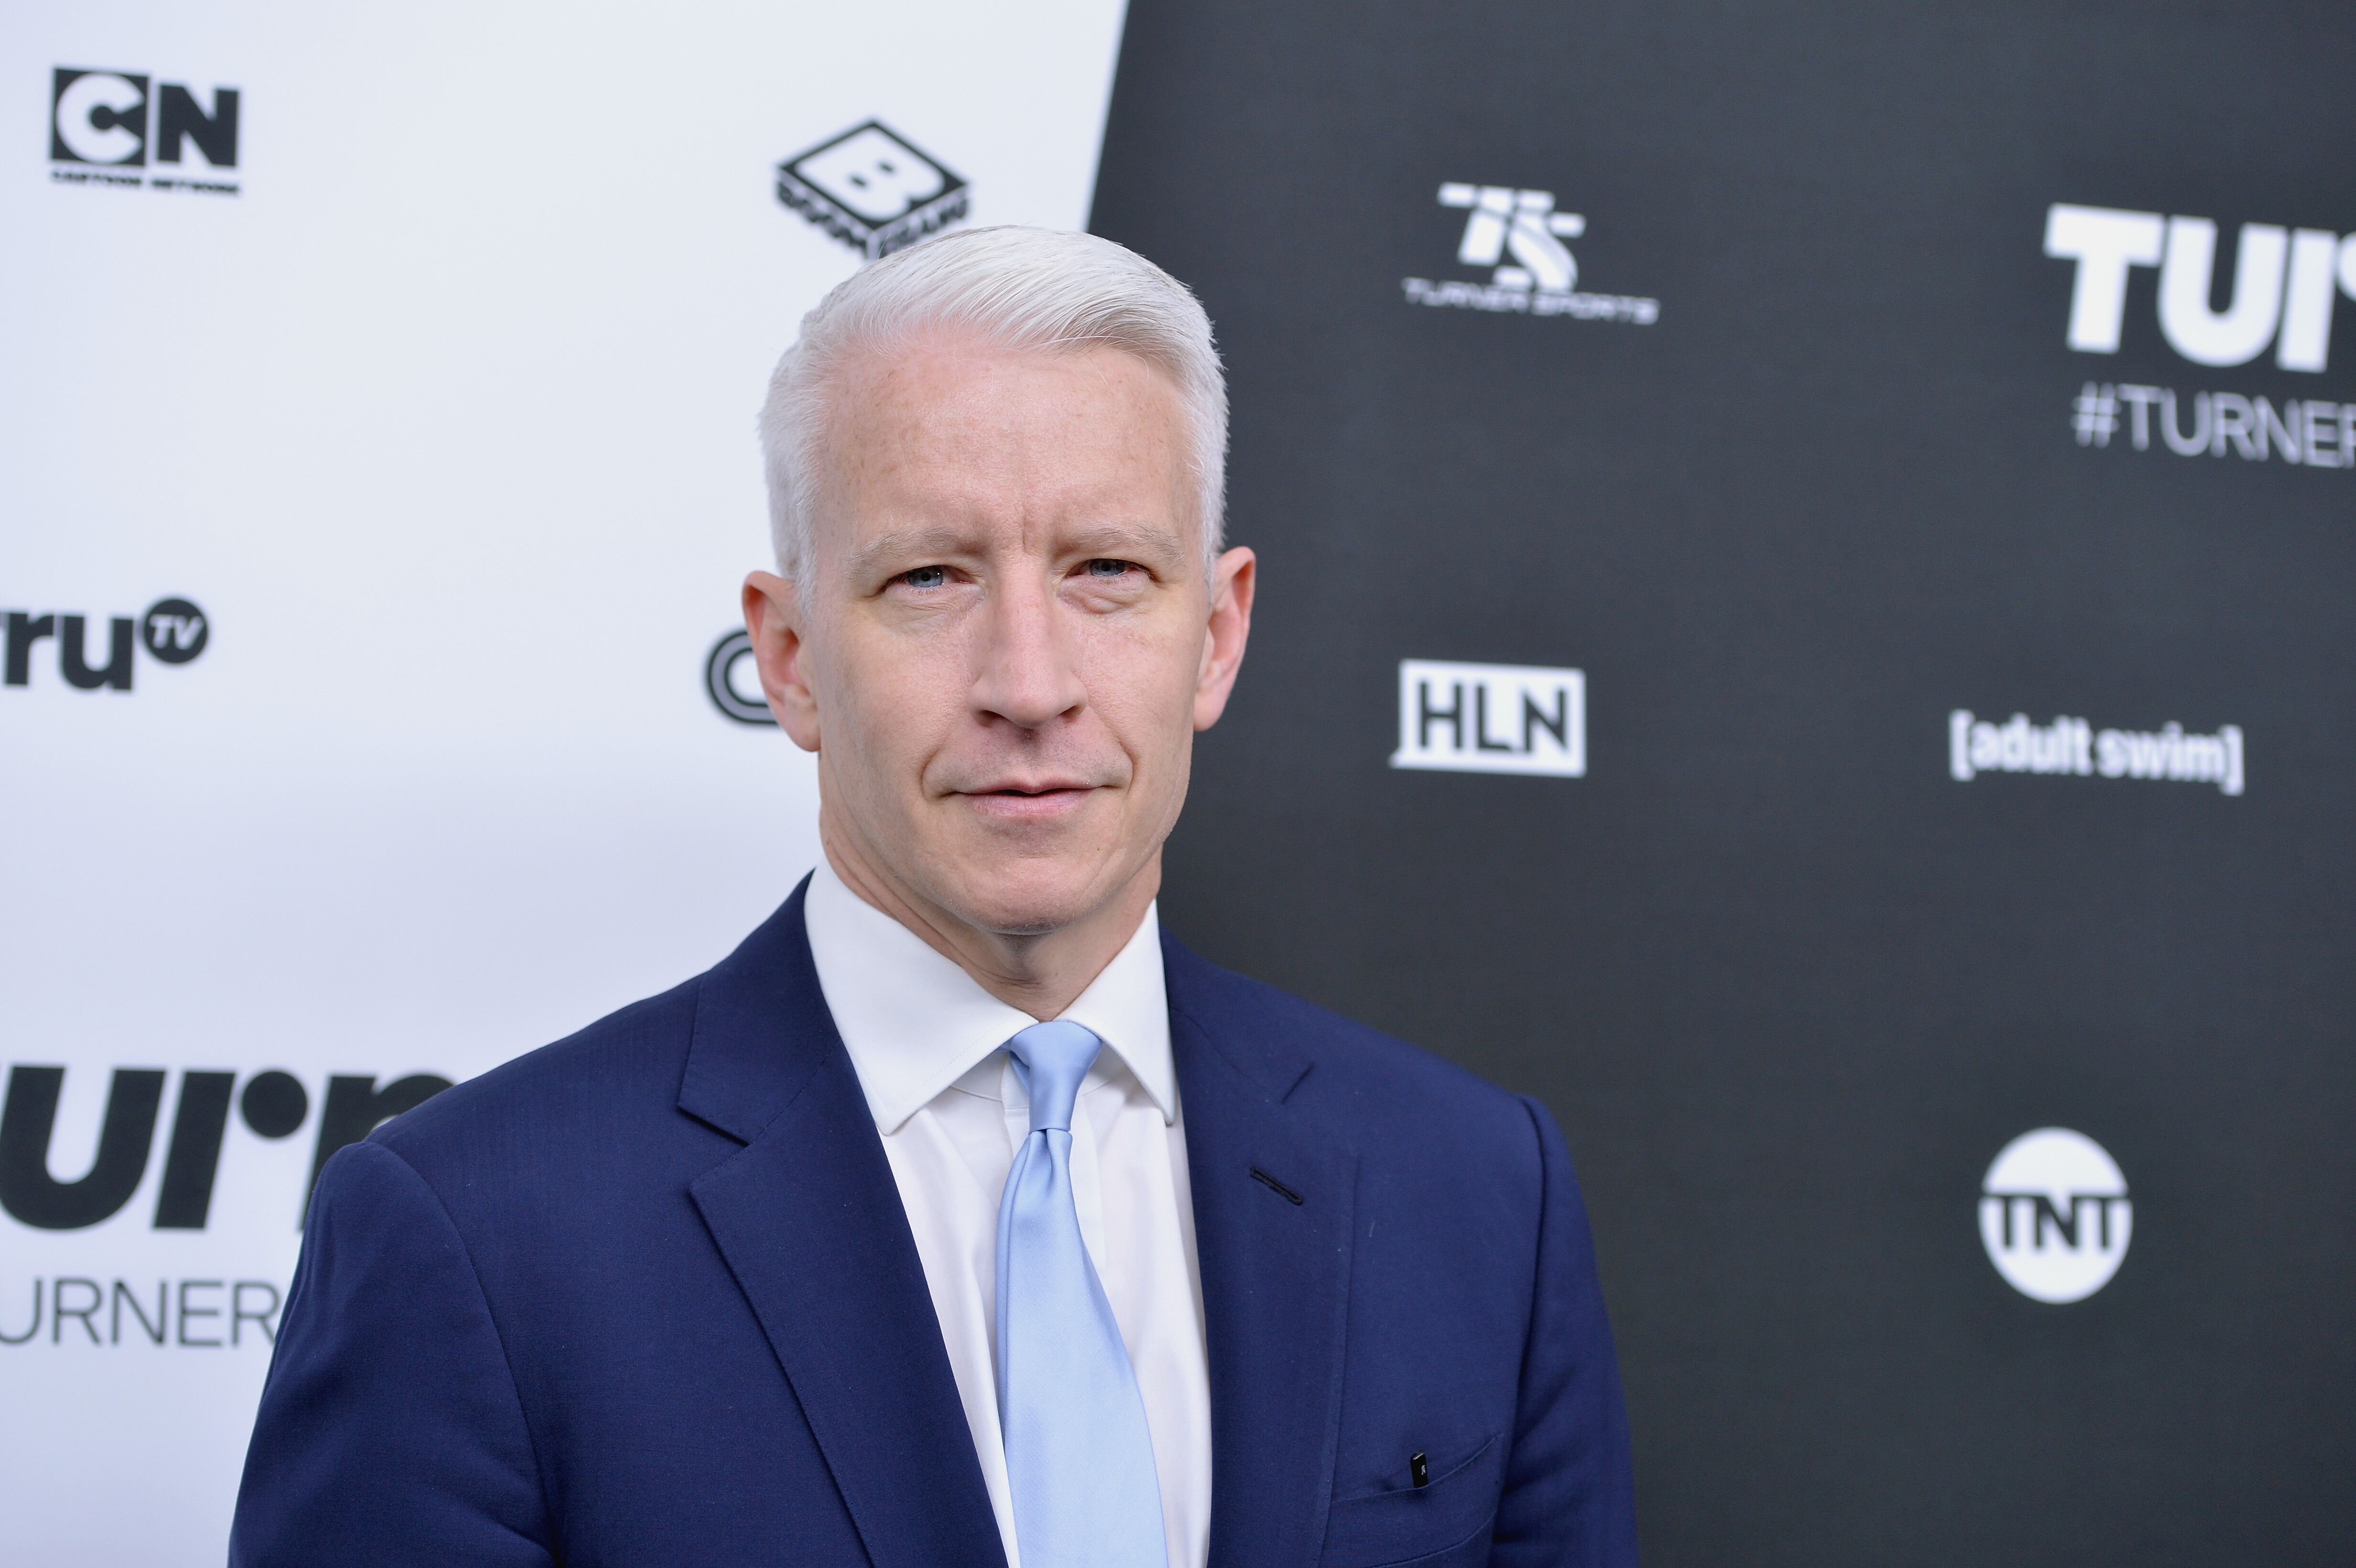 Anderson Cooper at the Turner Upfront held at Nick & Stef's Steakhouse on May 18, 2016, in New York City | Photo: Slaven Vlasic/Getty Images